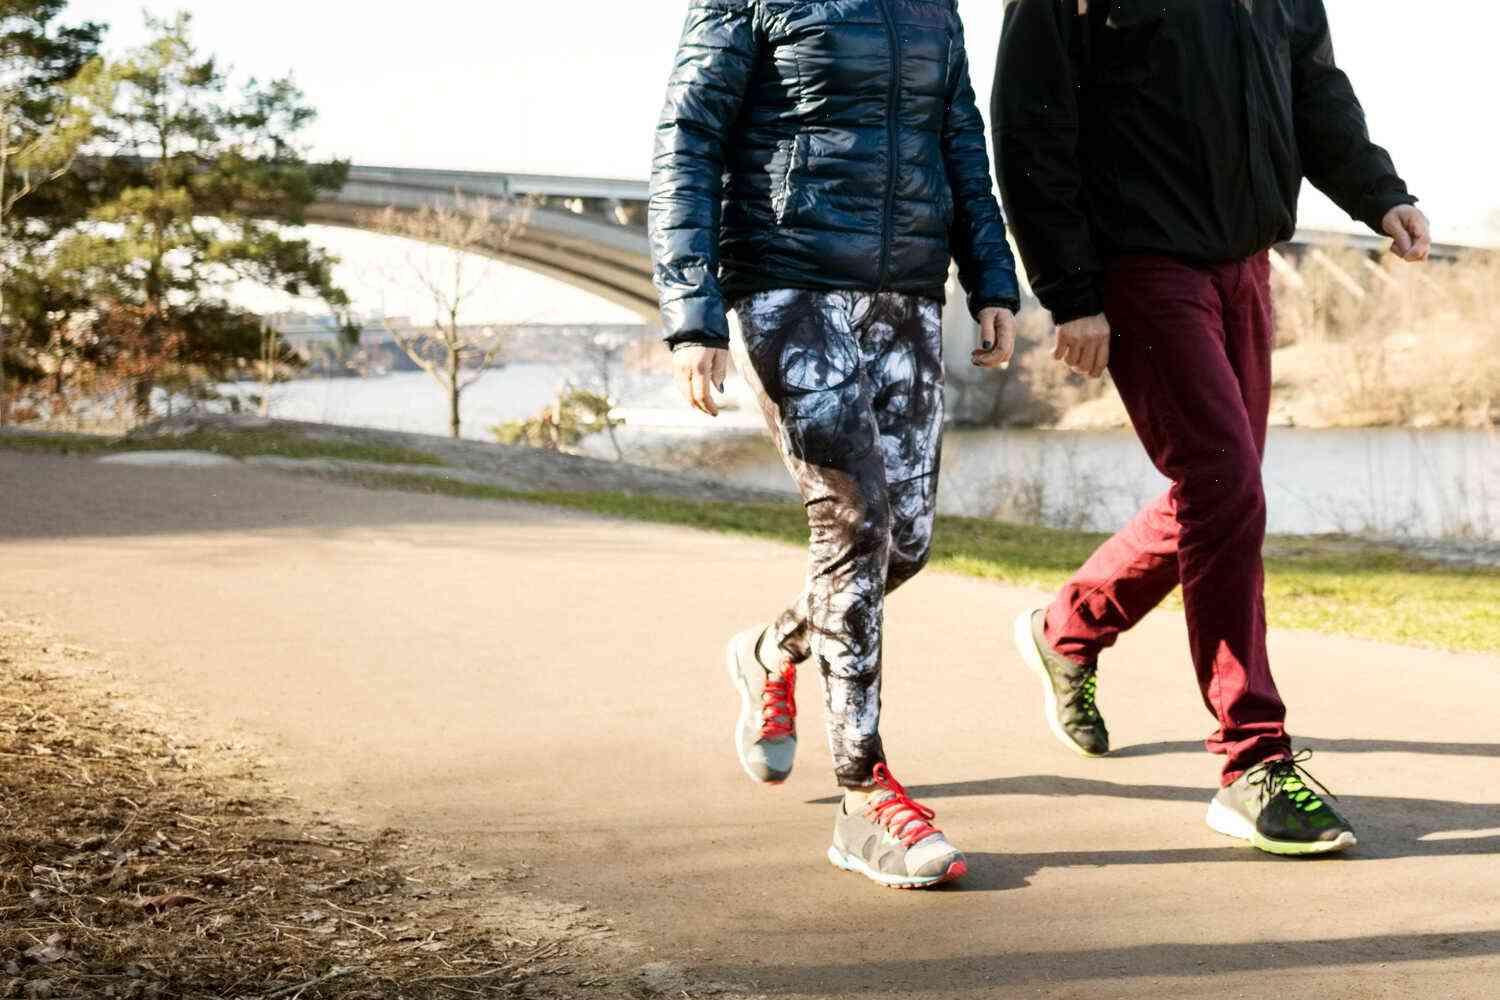 Exercise, no matter how hard, can blunt certain symptoms of Alzheimer’s or other forms of dementia, a new study finds